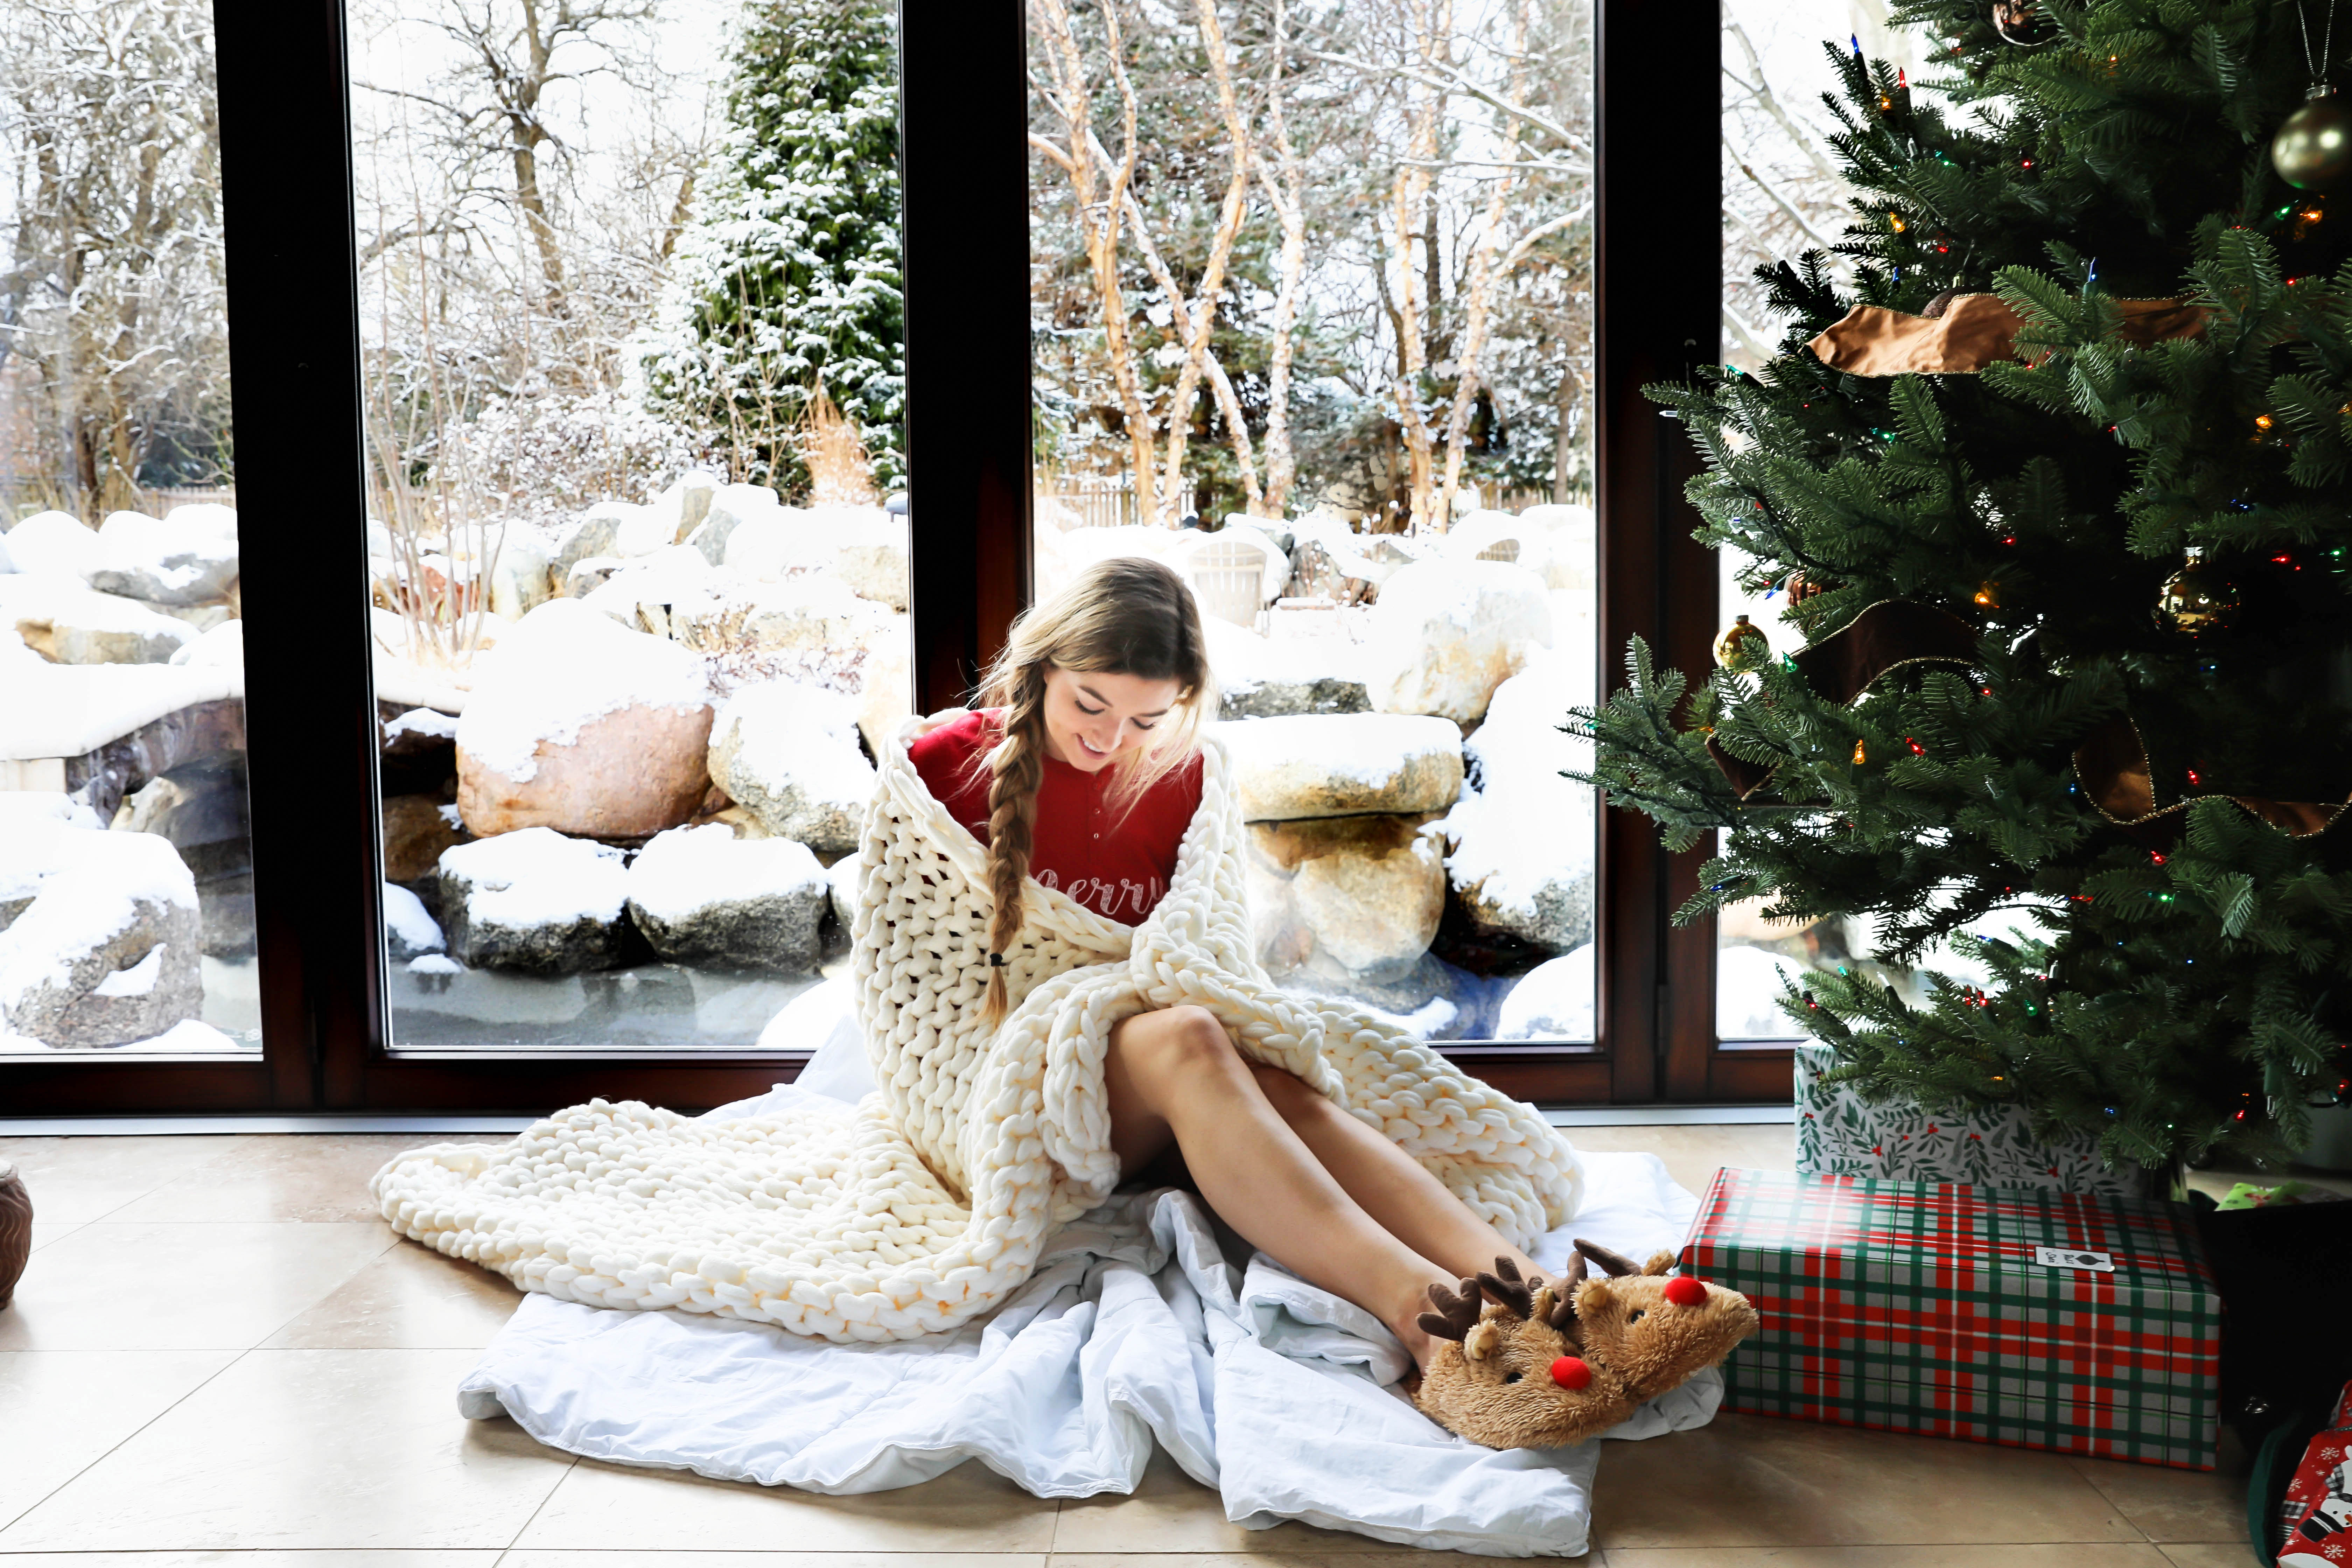 Snowy Christmas Windows and knit blanket by the christmas tree on fashion blog daily dose of charm by lauren lindmark